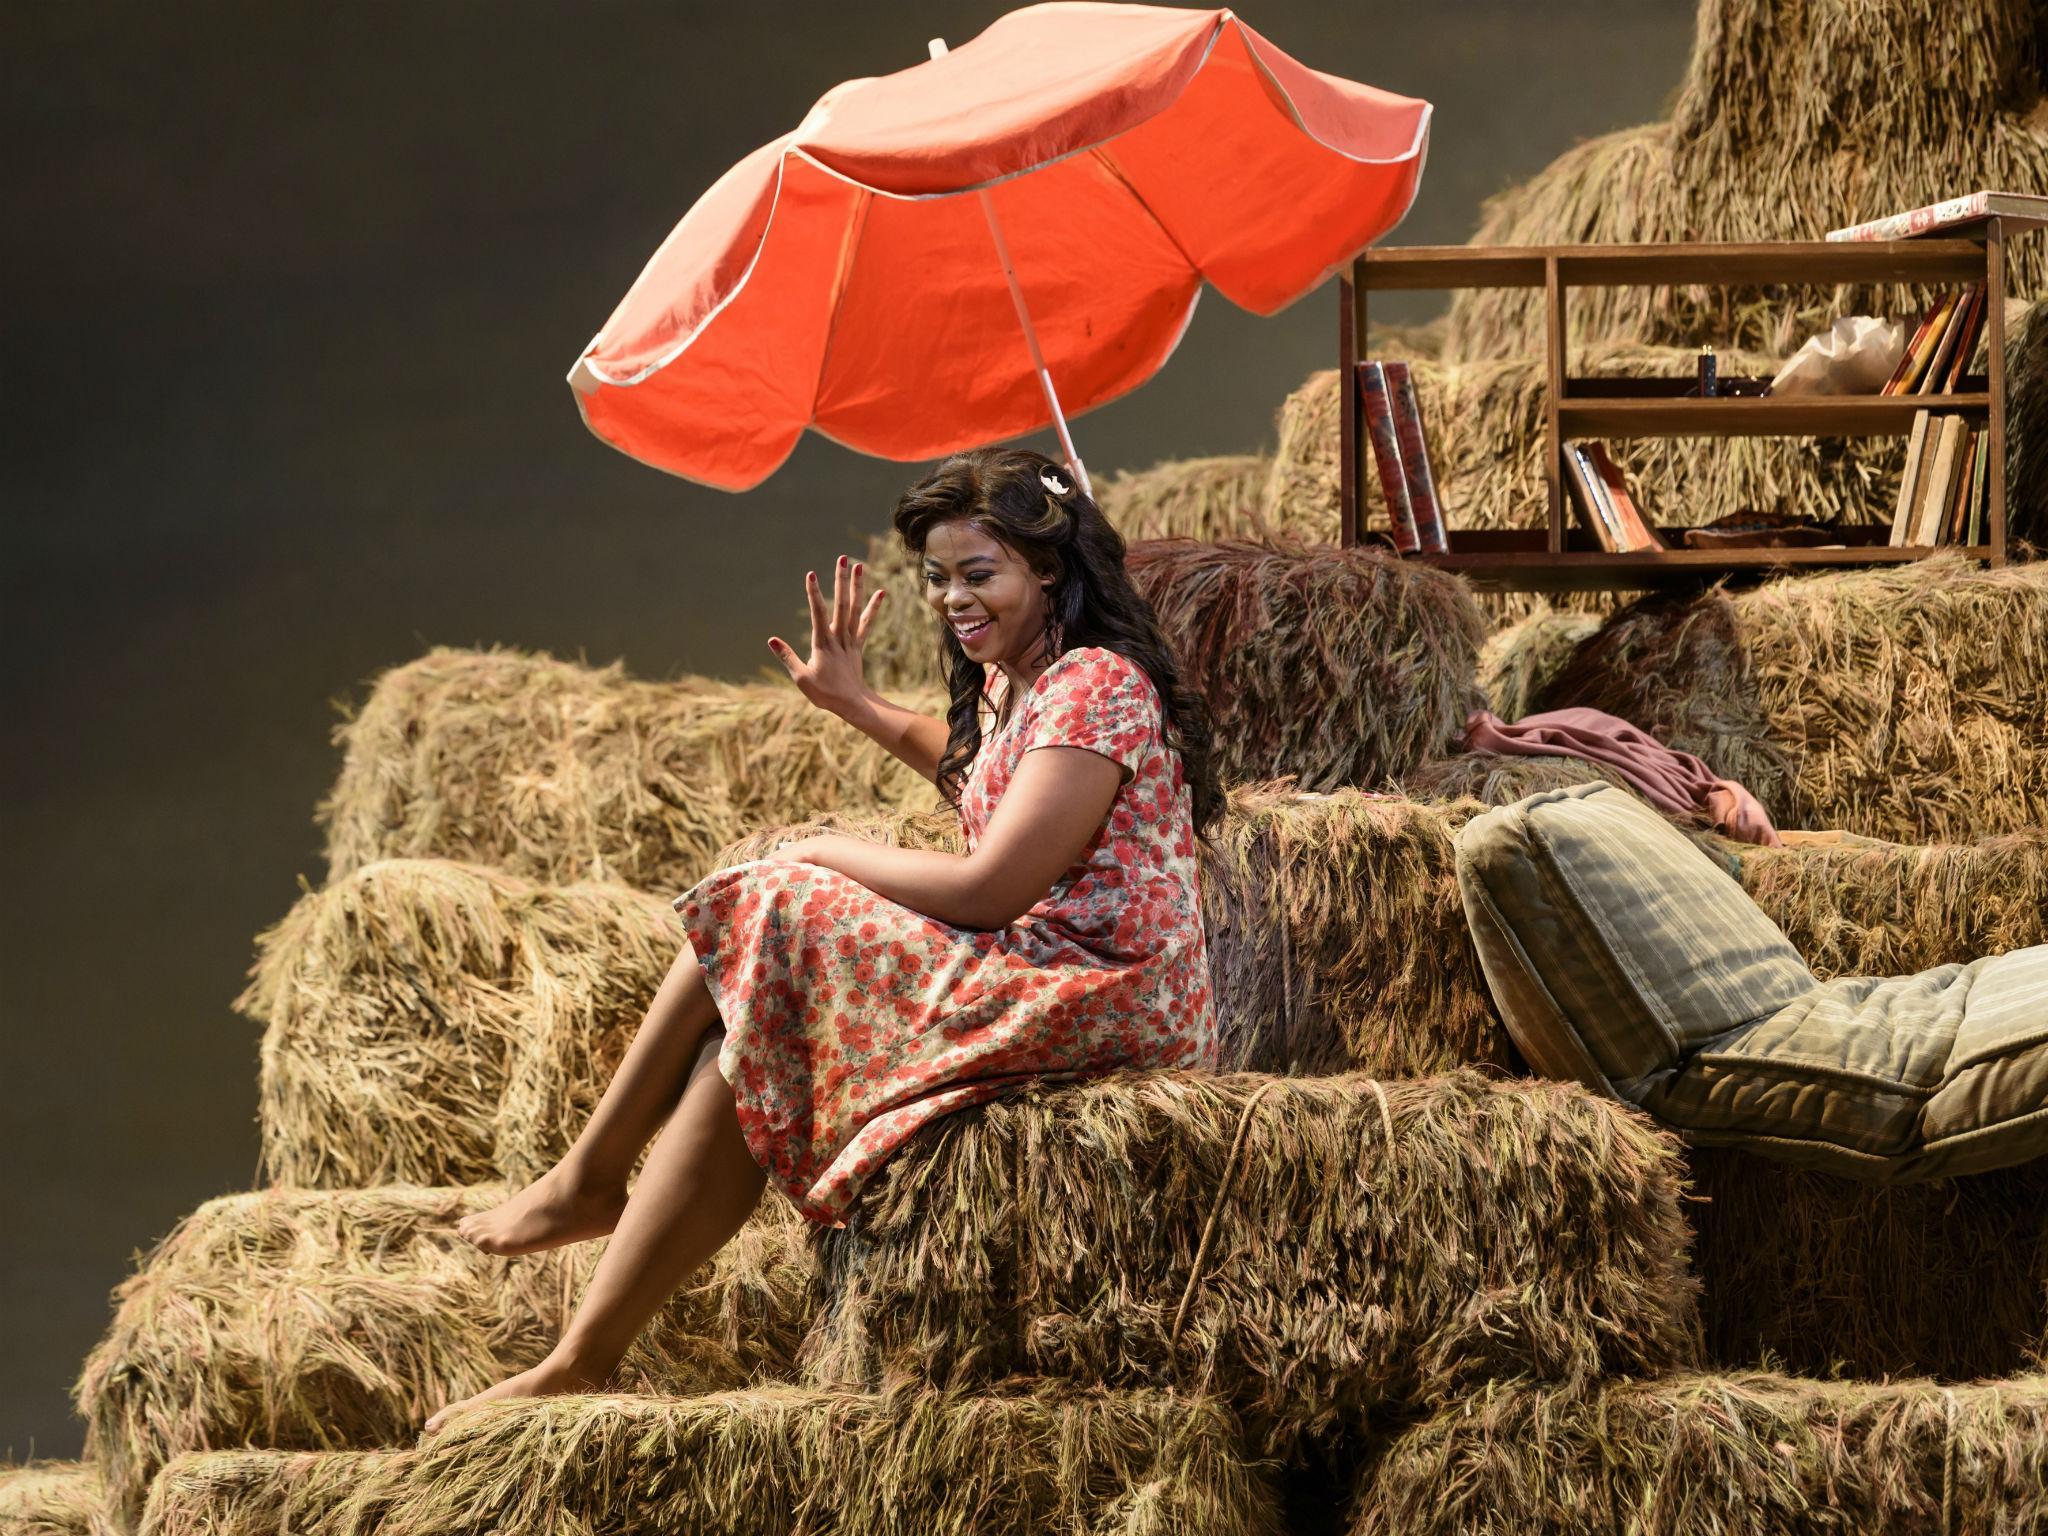 Pretty Yende as Adina in 'L'elisir d'amore' at the Royal Opera House